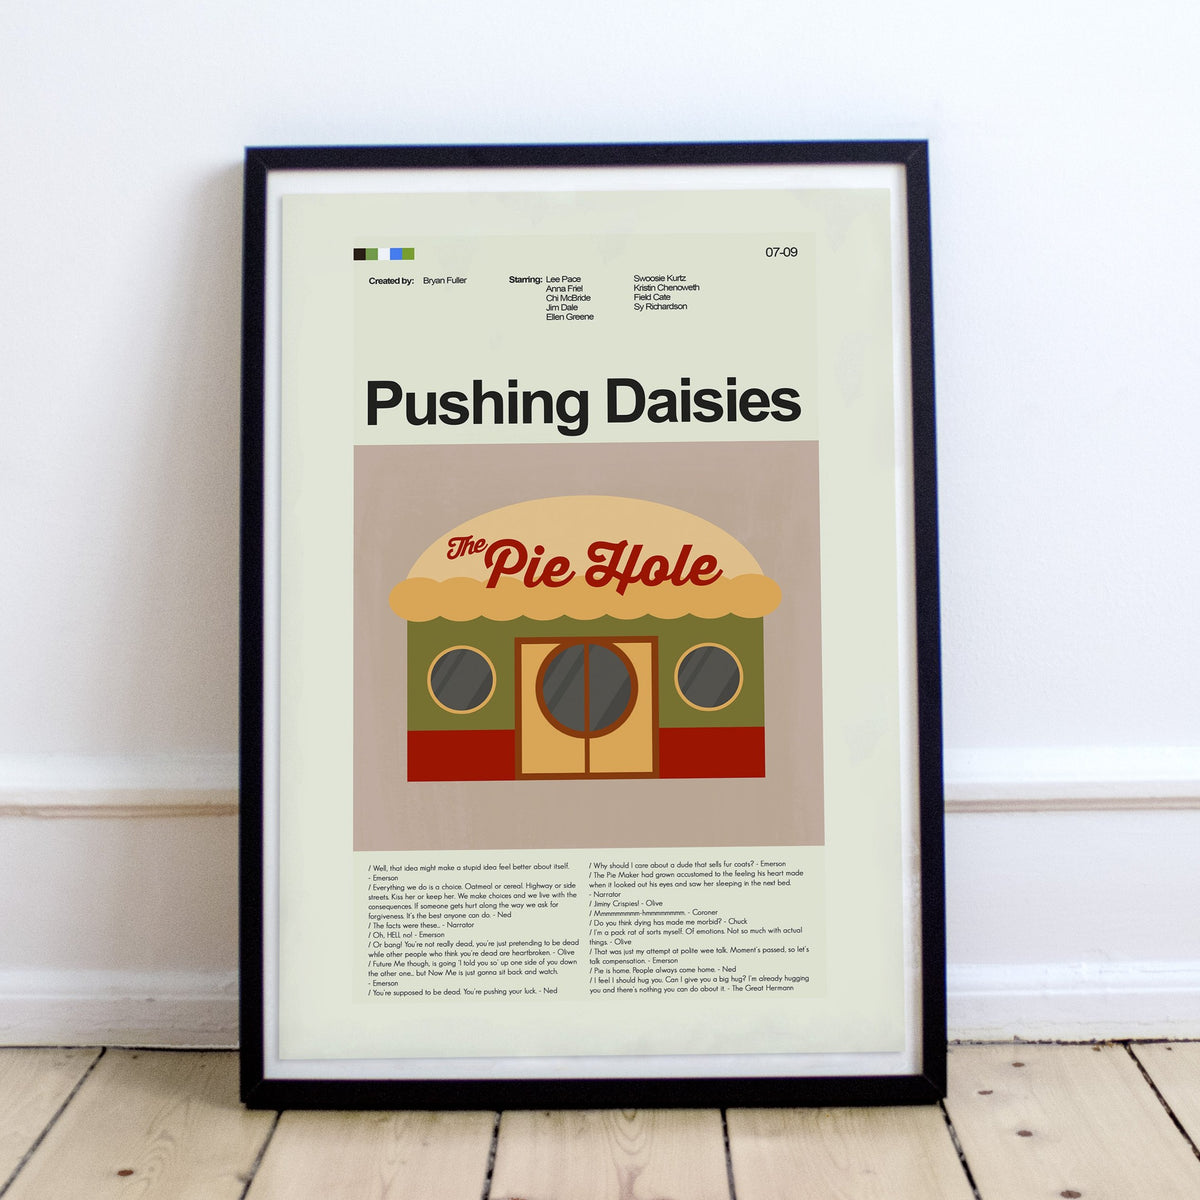 Pushing Daisies - The Pie Hole  | 12"x18" or 18"x24" Print only